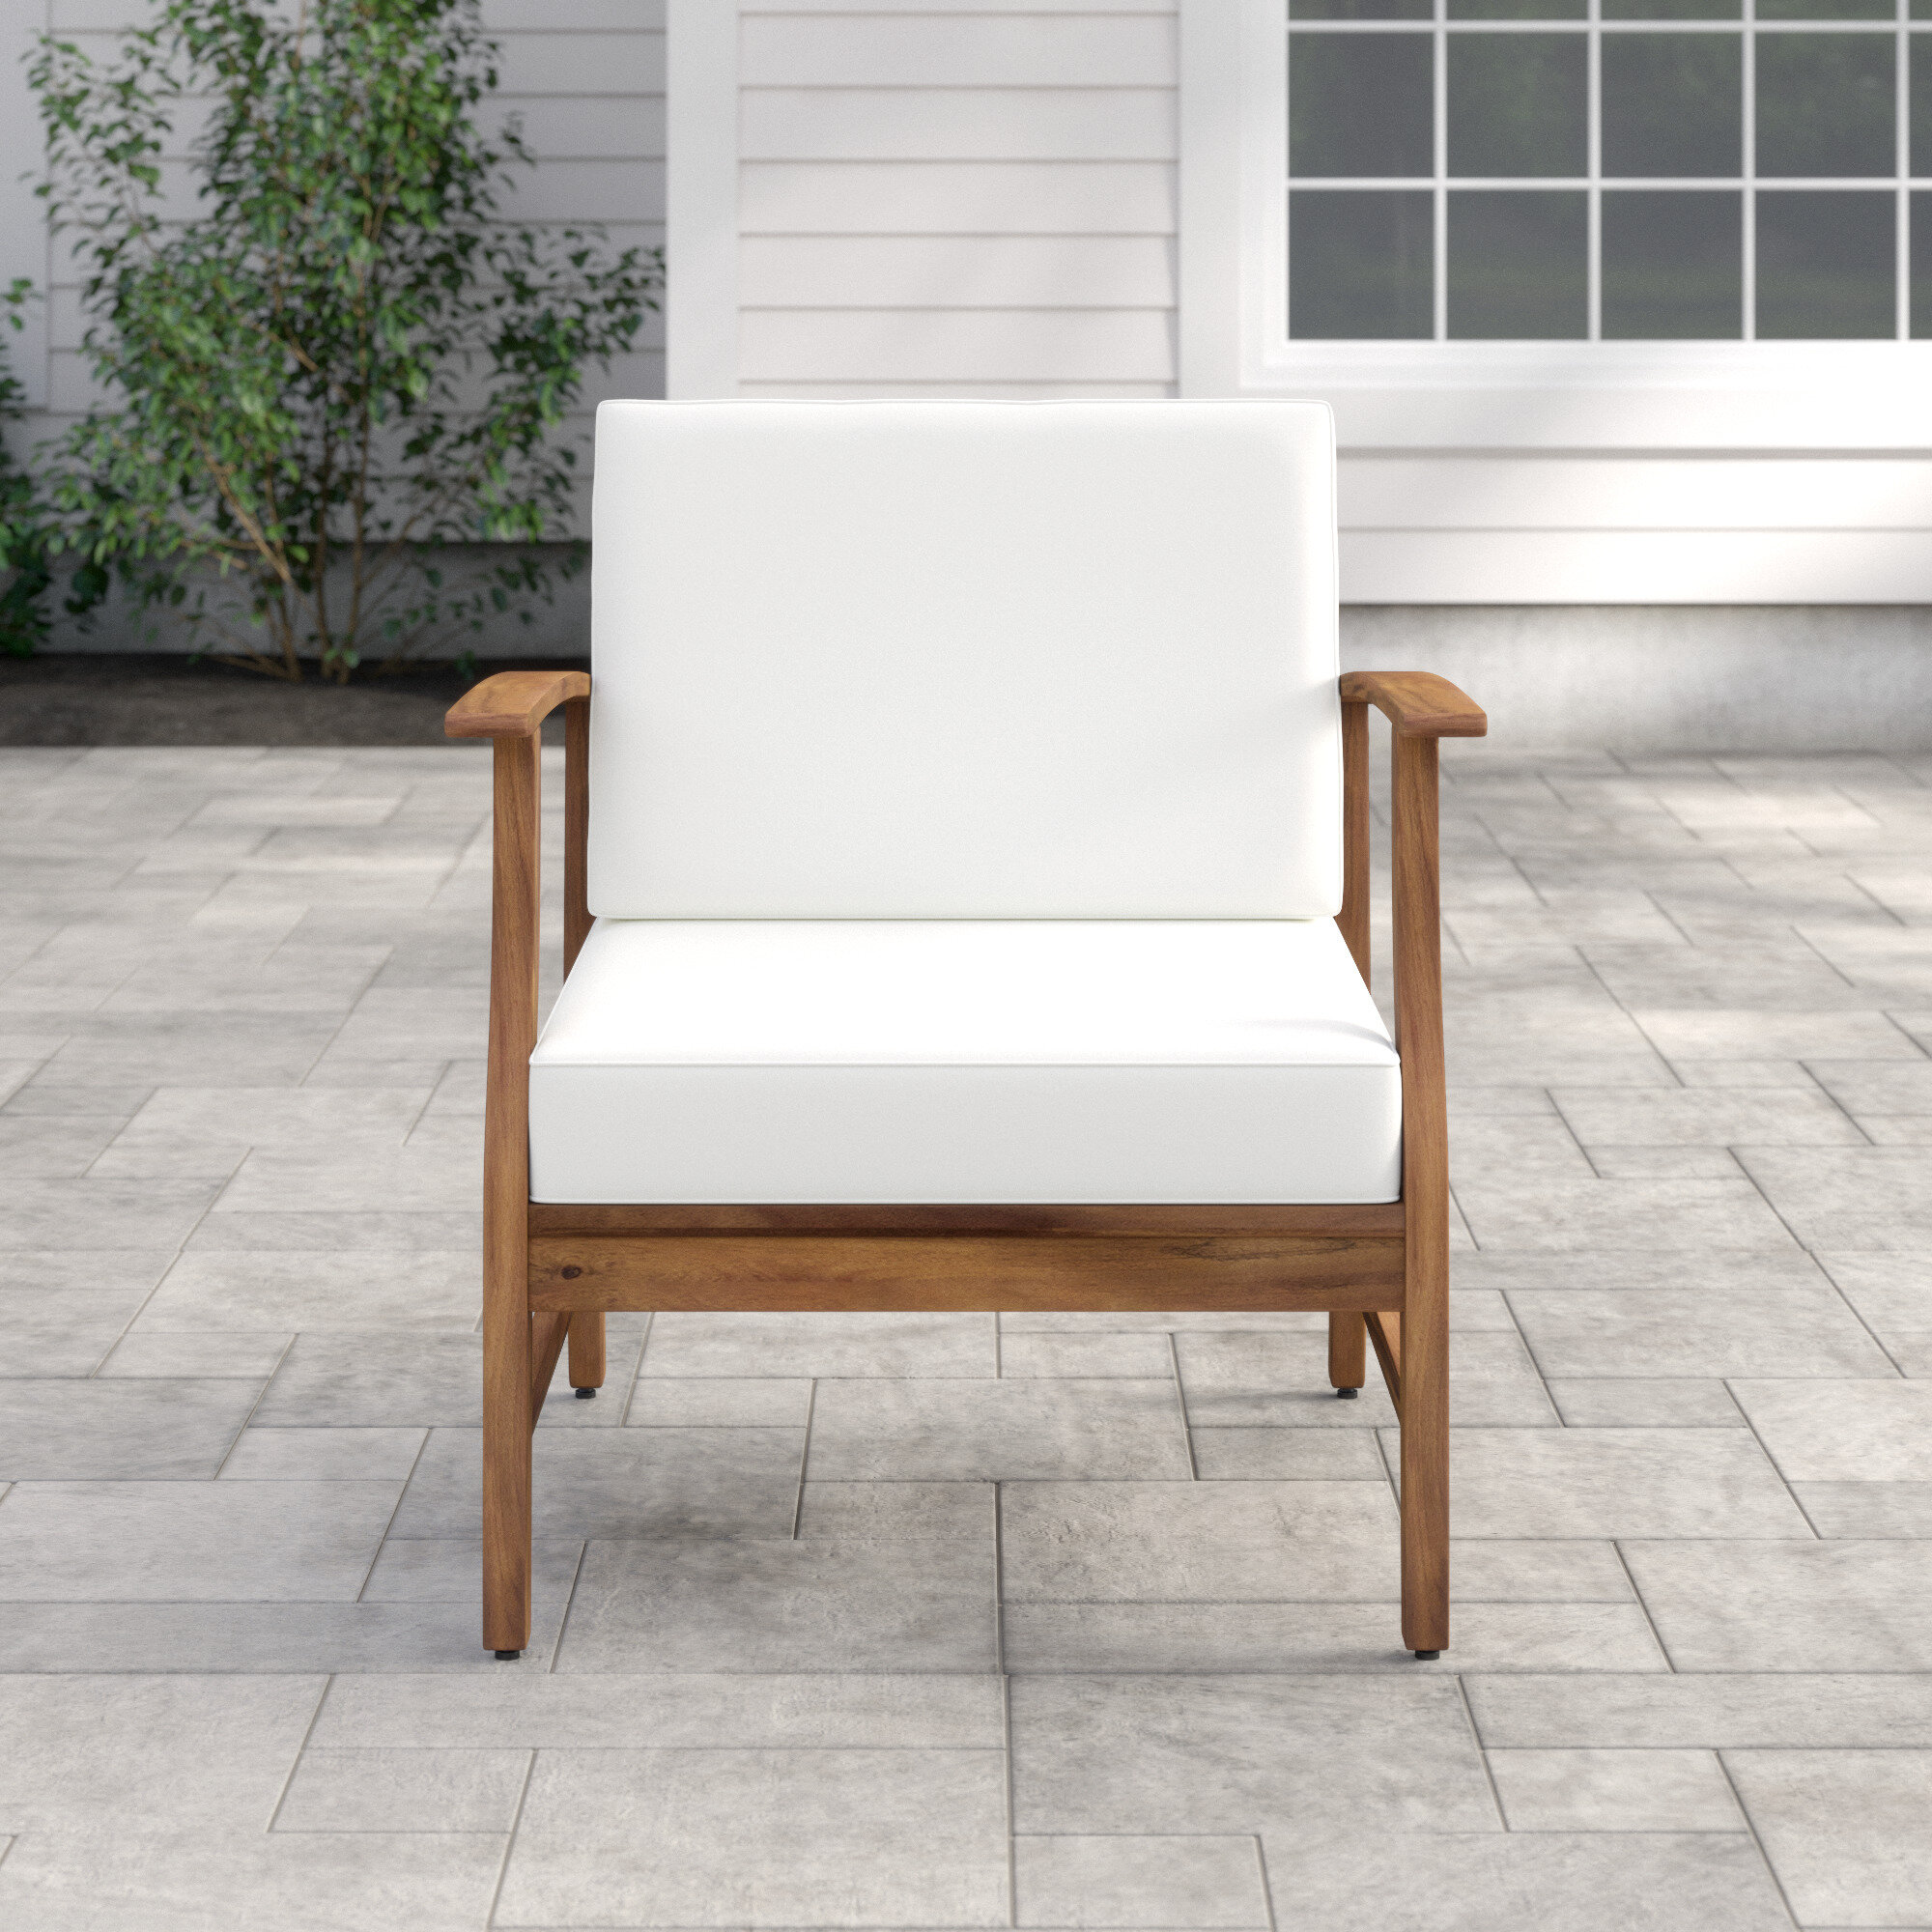 amadeonorth: Patio Chairs Modern / Amazon Com Best Choice Products Set